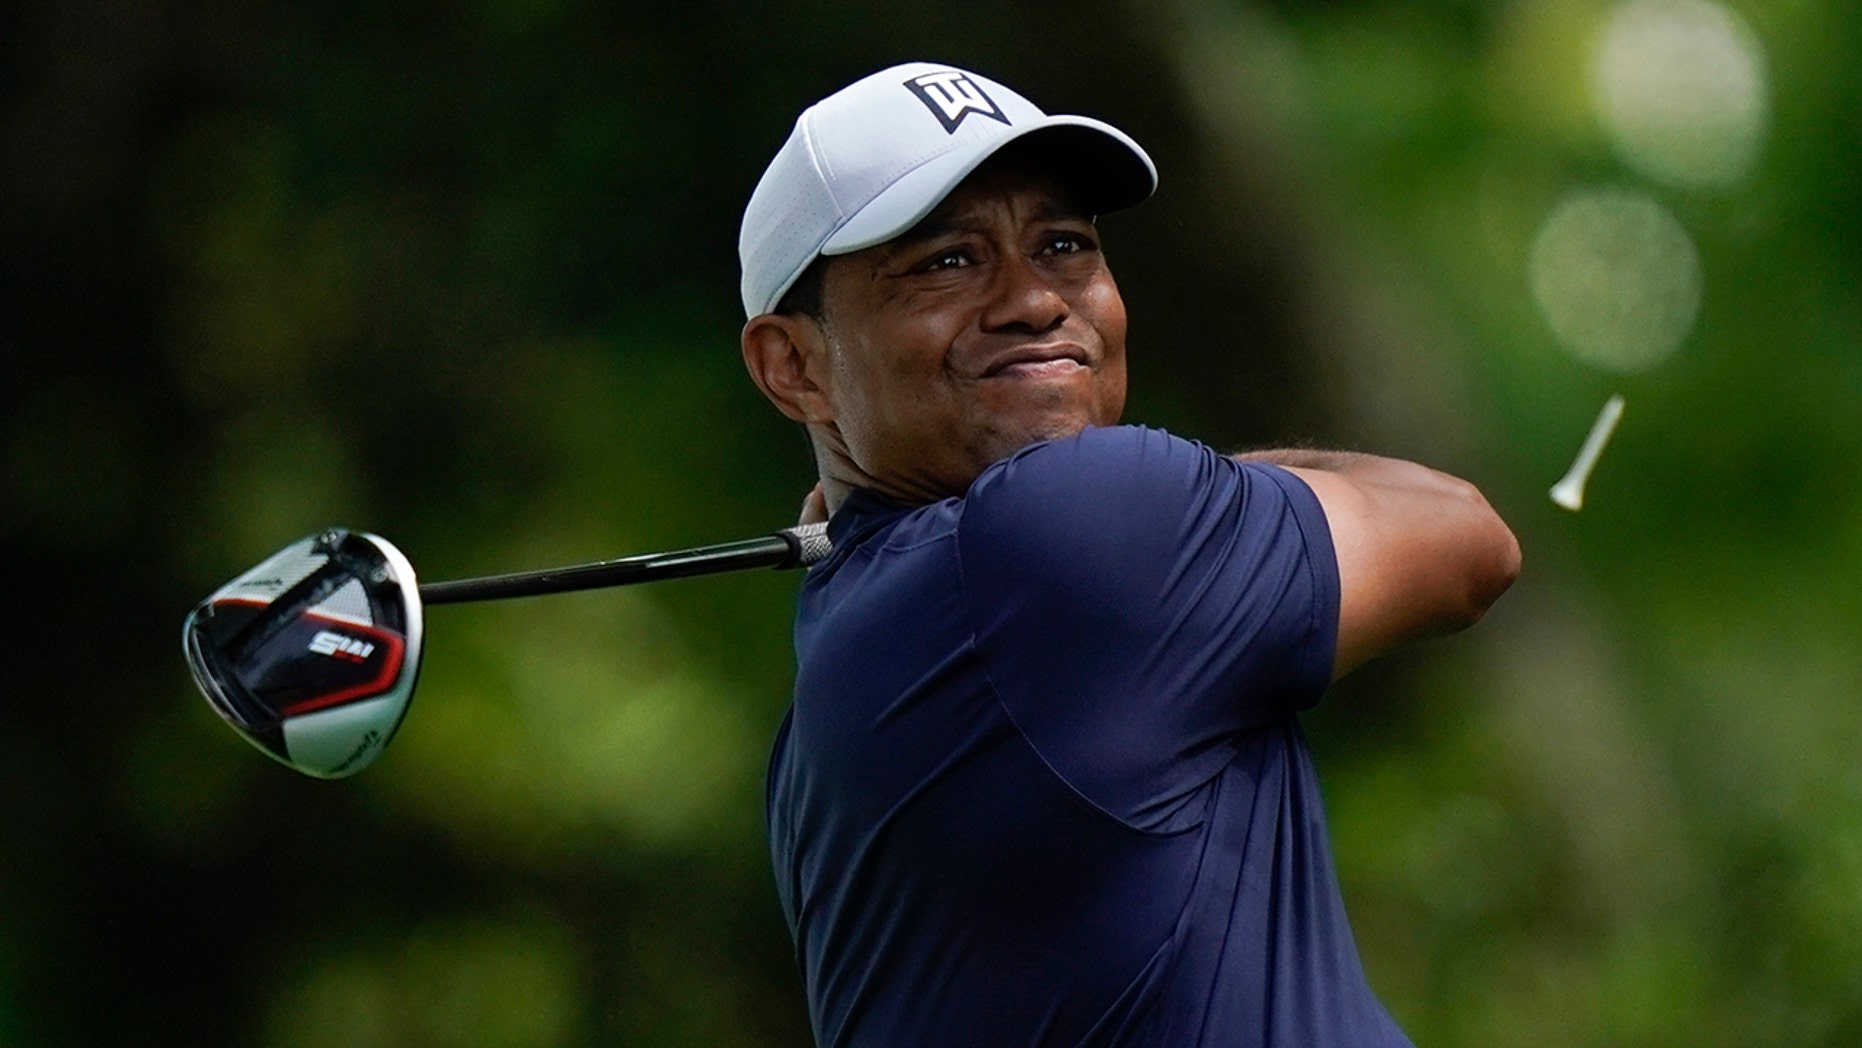 Tiger Woods knows he's in good shape after shooting 70 in Masters first round | Fox News1862 x 1048